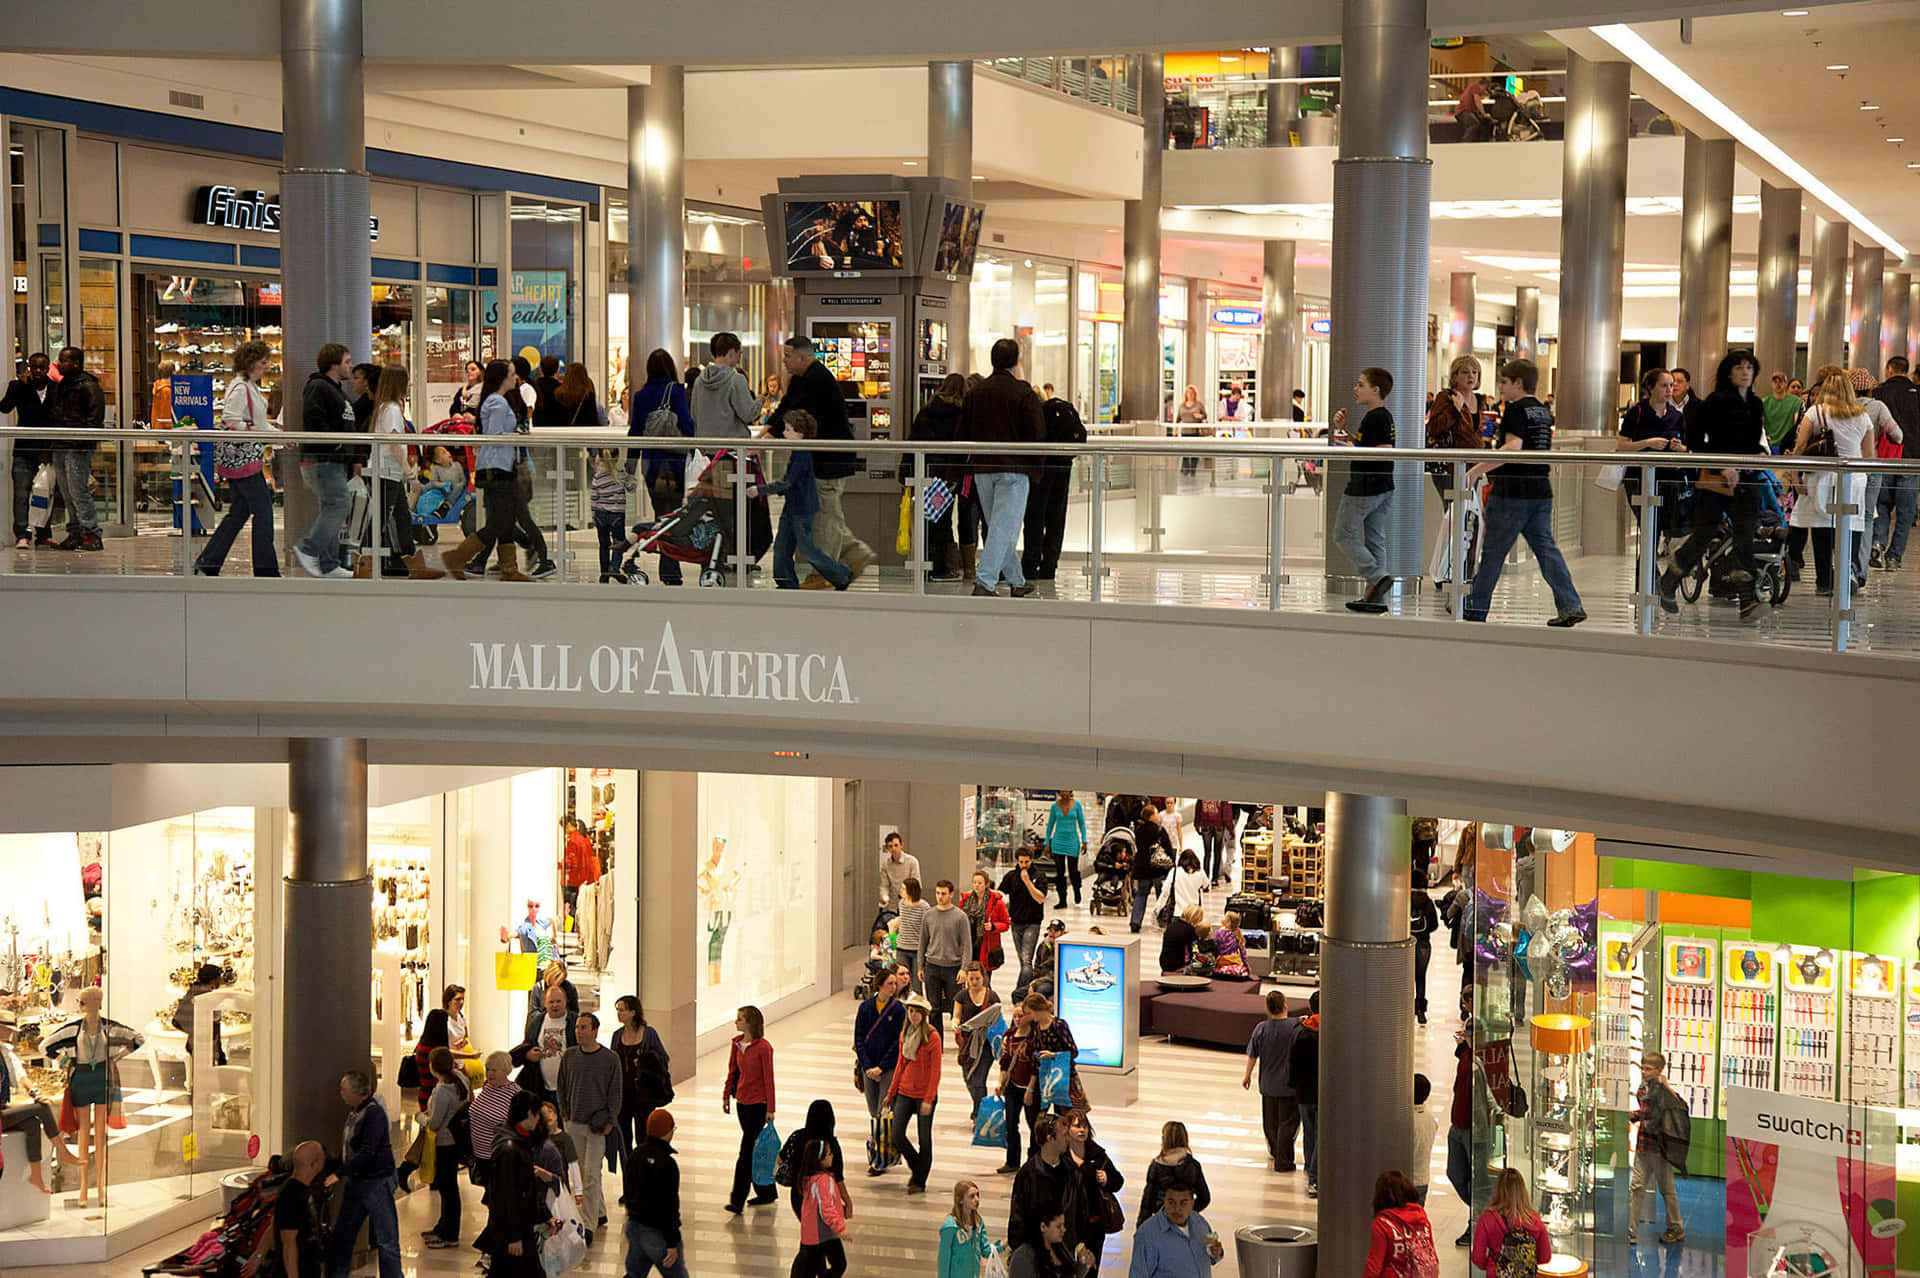 A Mall With Many People Walking Around